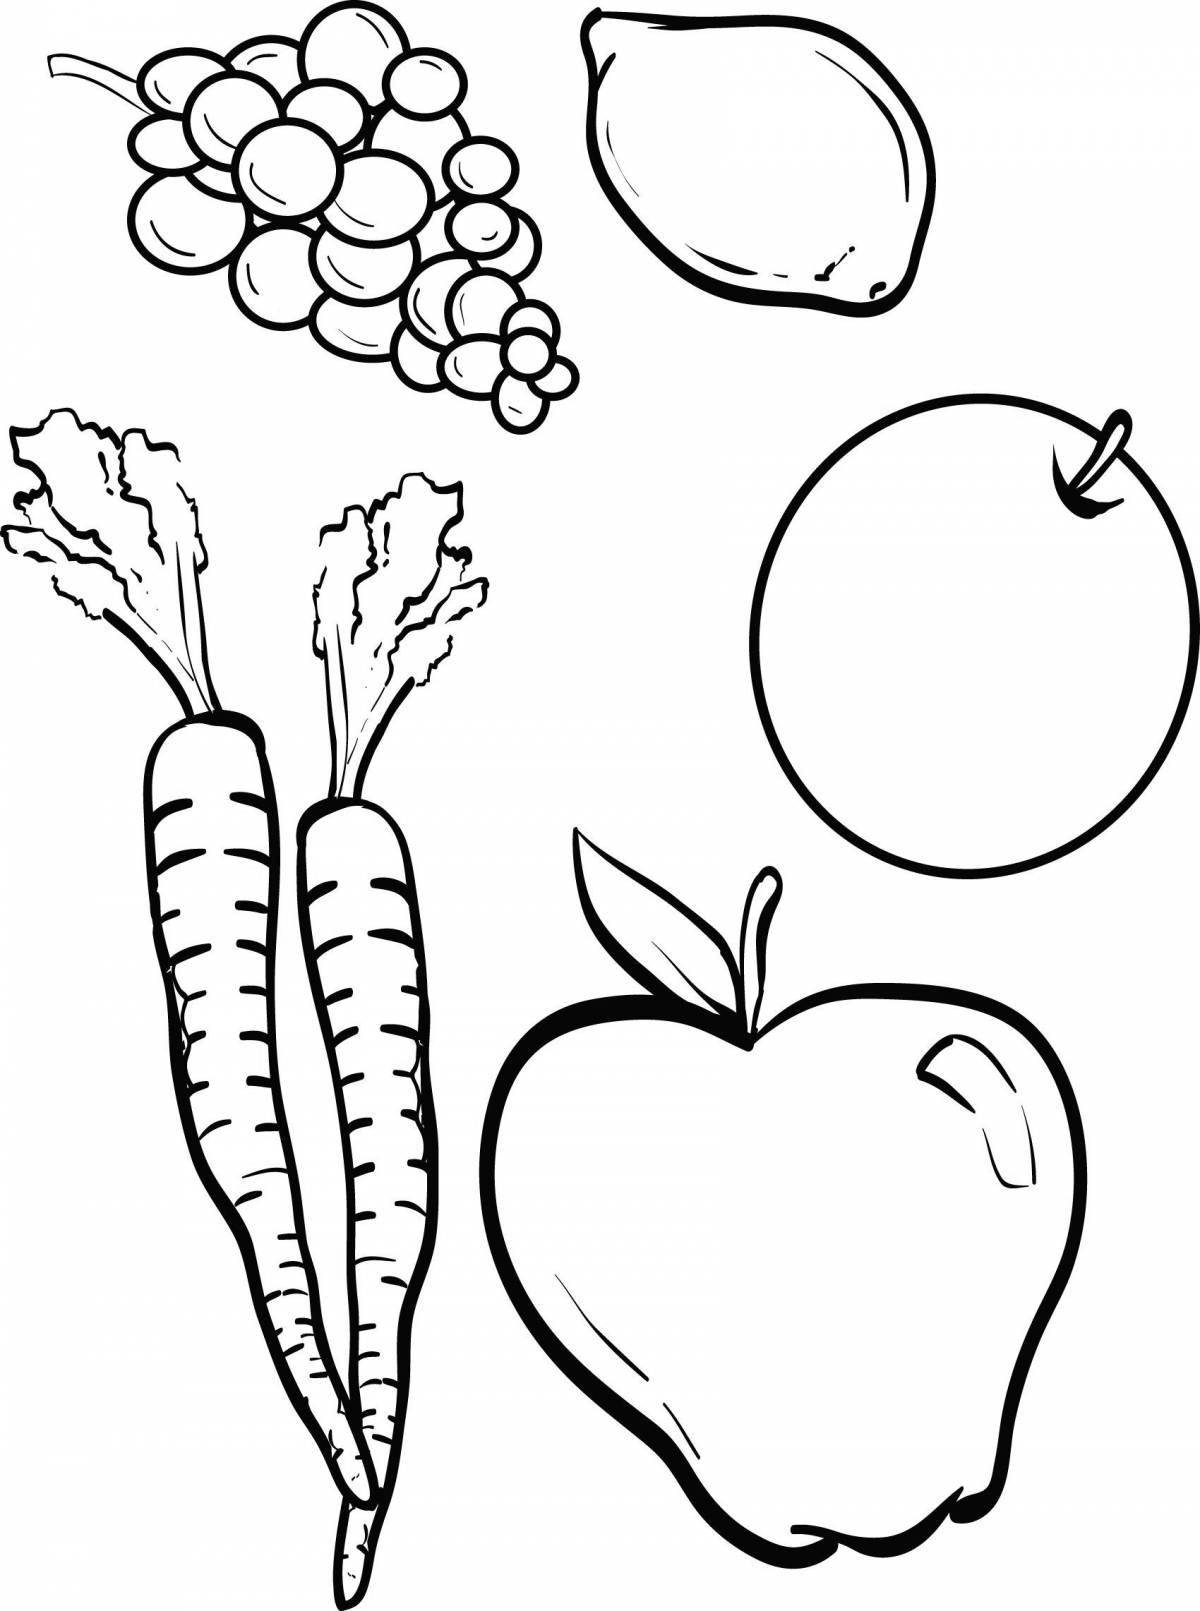 Fancy fruit and vegetable coloring book